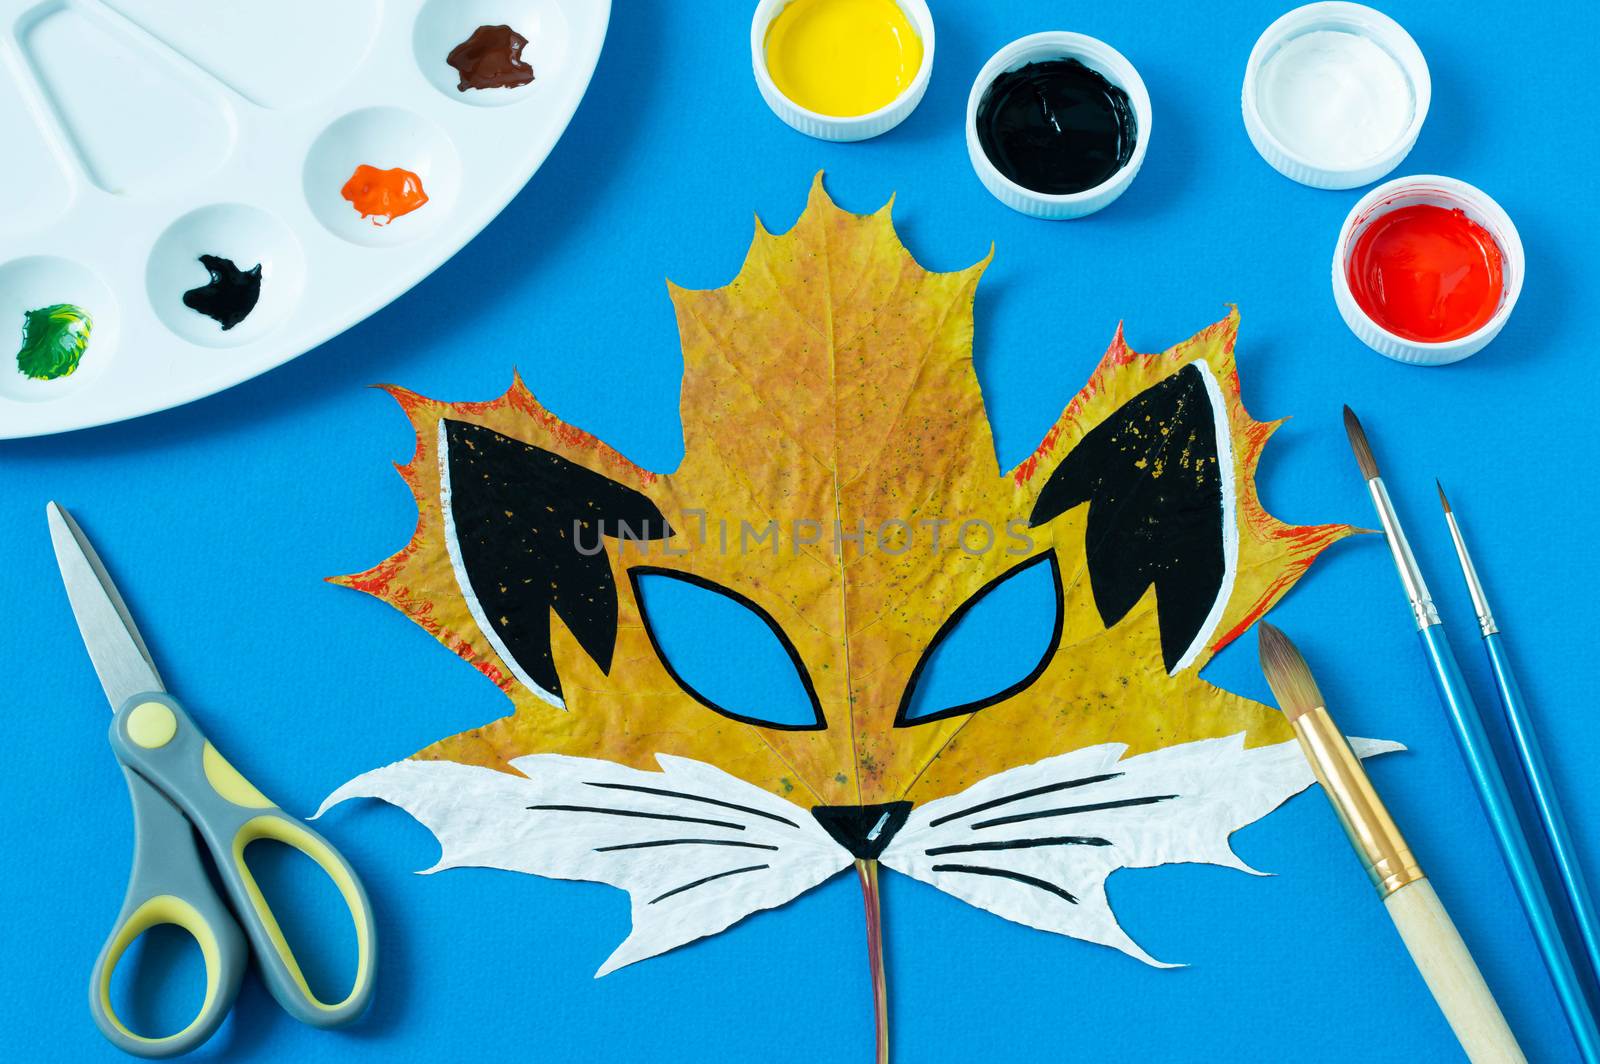 Mask painted on maple leaf. Drawing on autumn leaves. Fox mask for autumn carnival or party. Art project for children. DIY concept